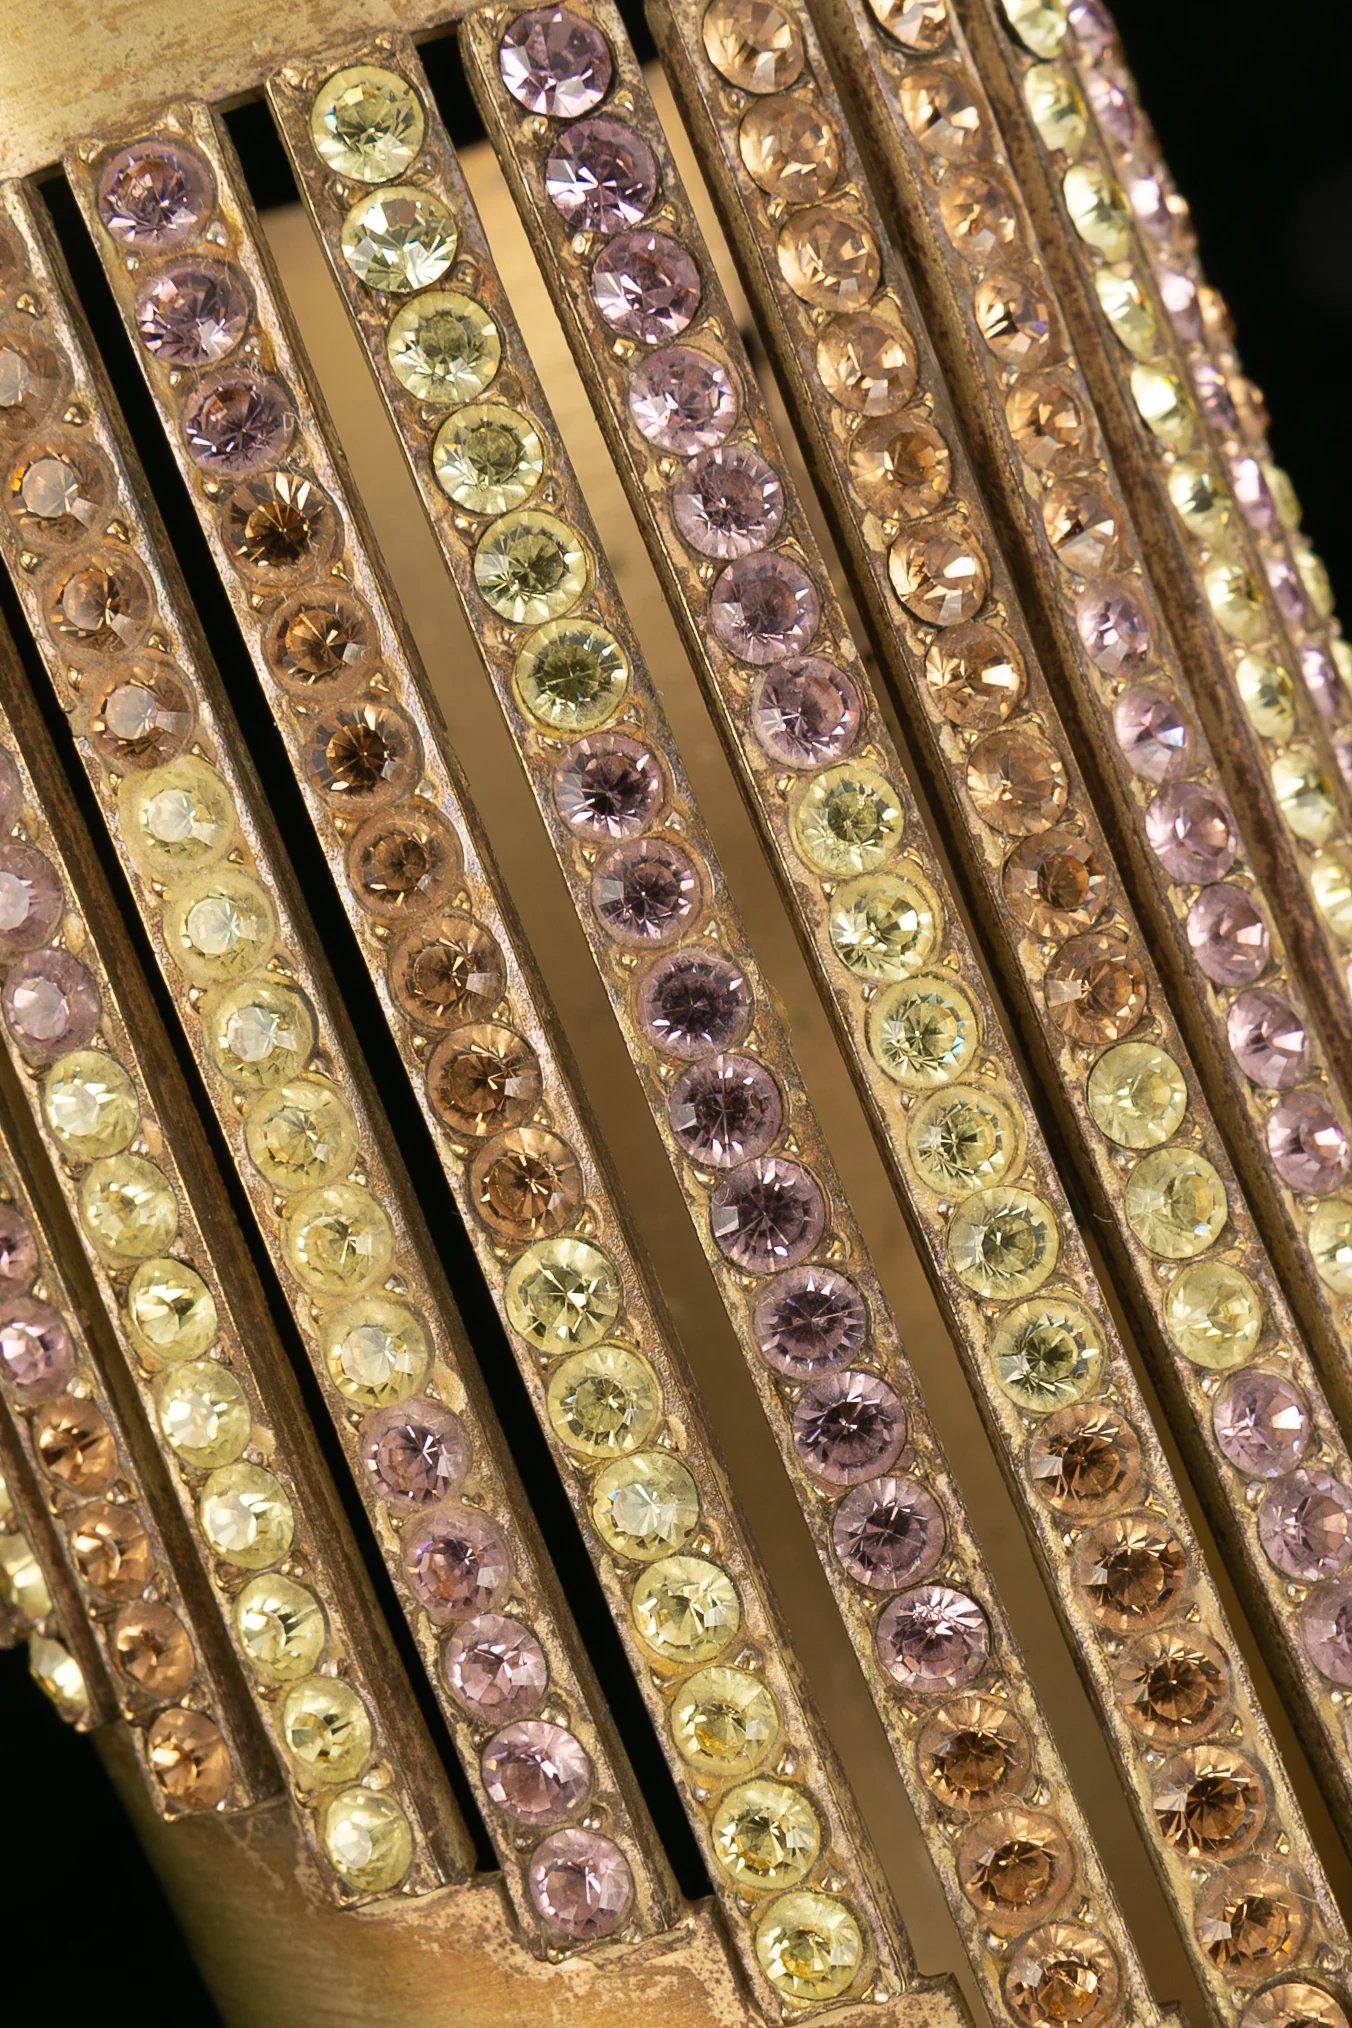 Chanel -Golden metal sleeve paved with multicolored rhinestones.

Additional information:
Dimensions: Maximum circumference: 24 cm 
Minimum circumference: 21 cm 
Height: 12 cm 
Opening: 3.5 cm
Condition: Good condition
Seller Ref number: BRAB14